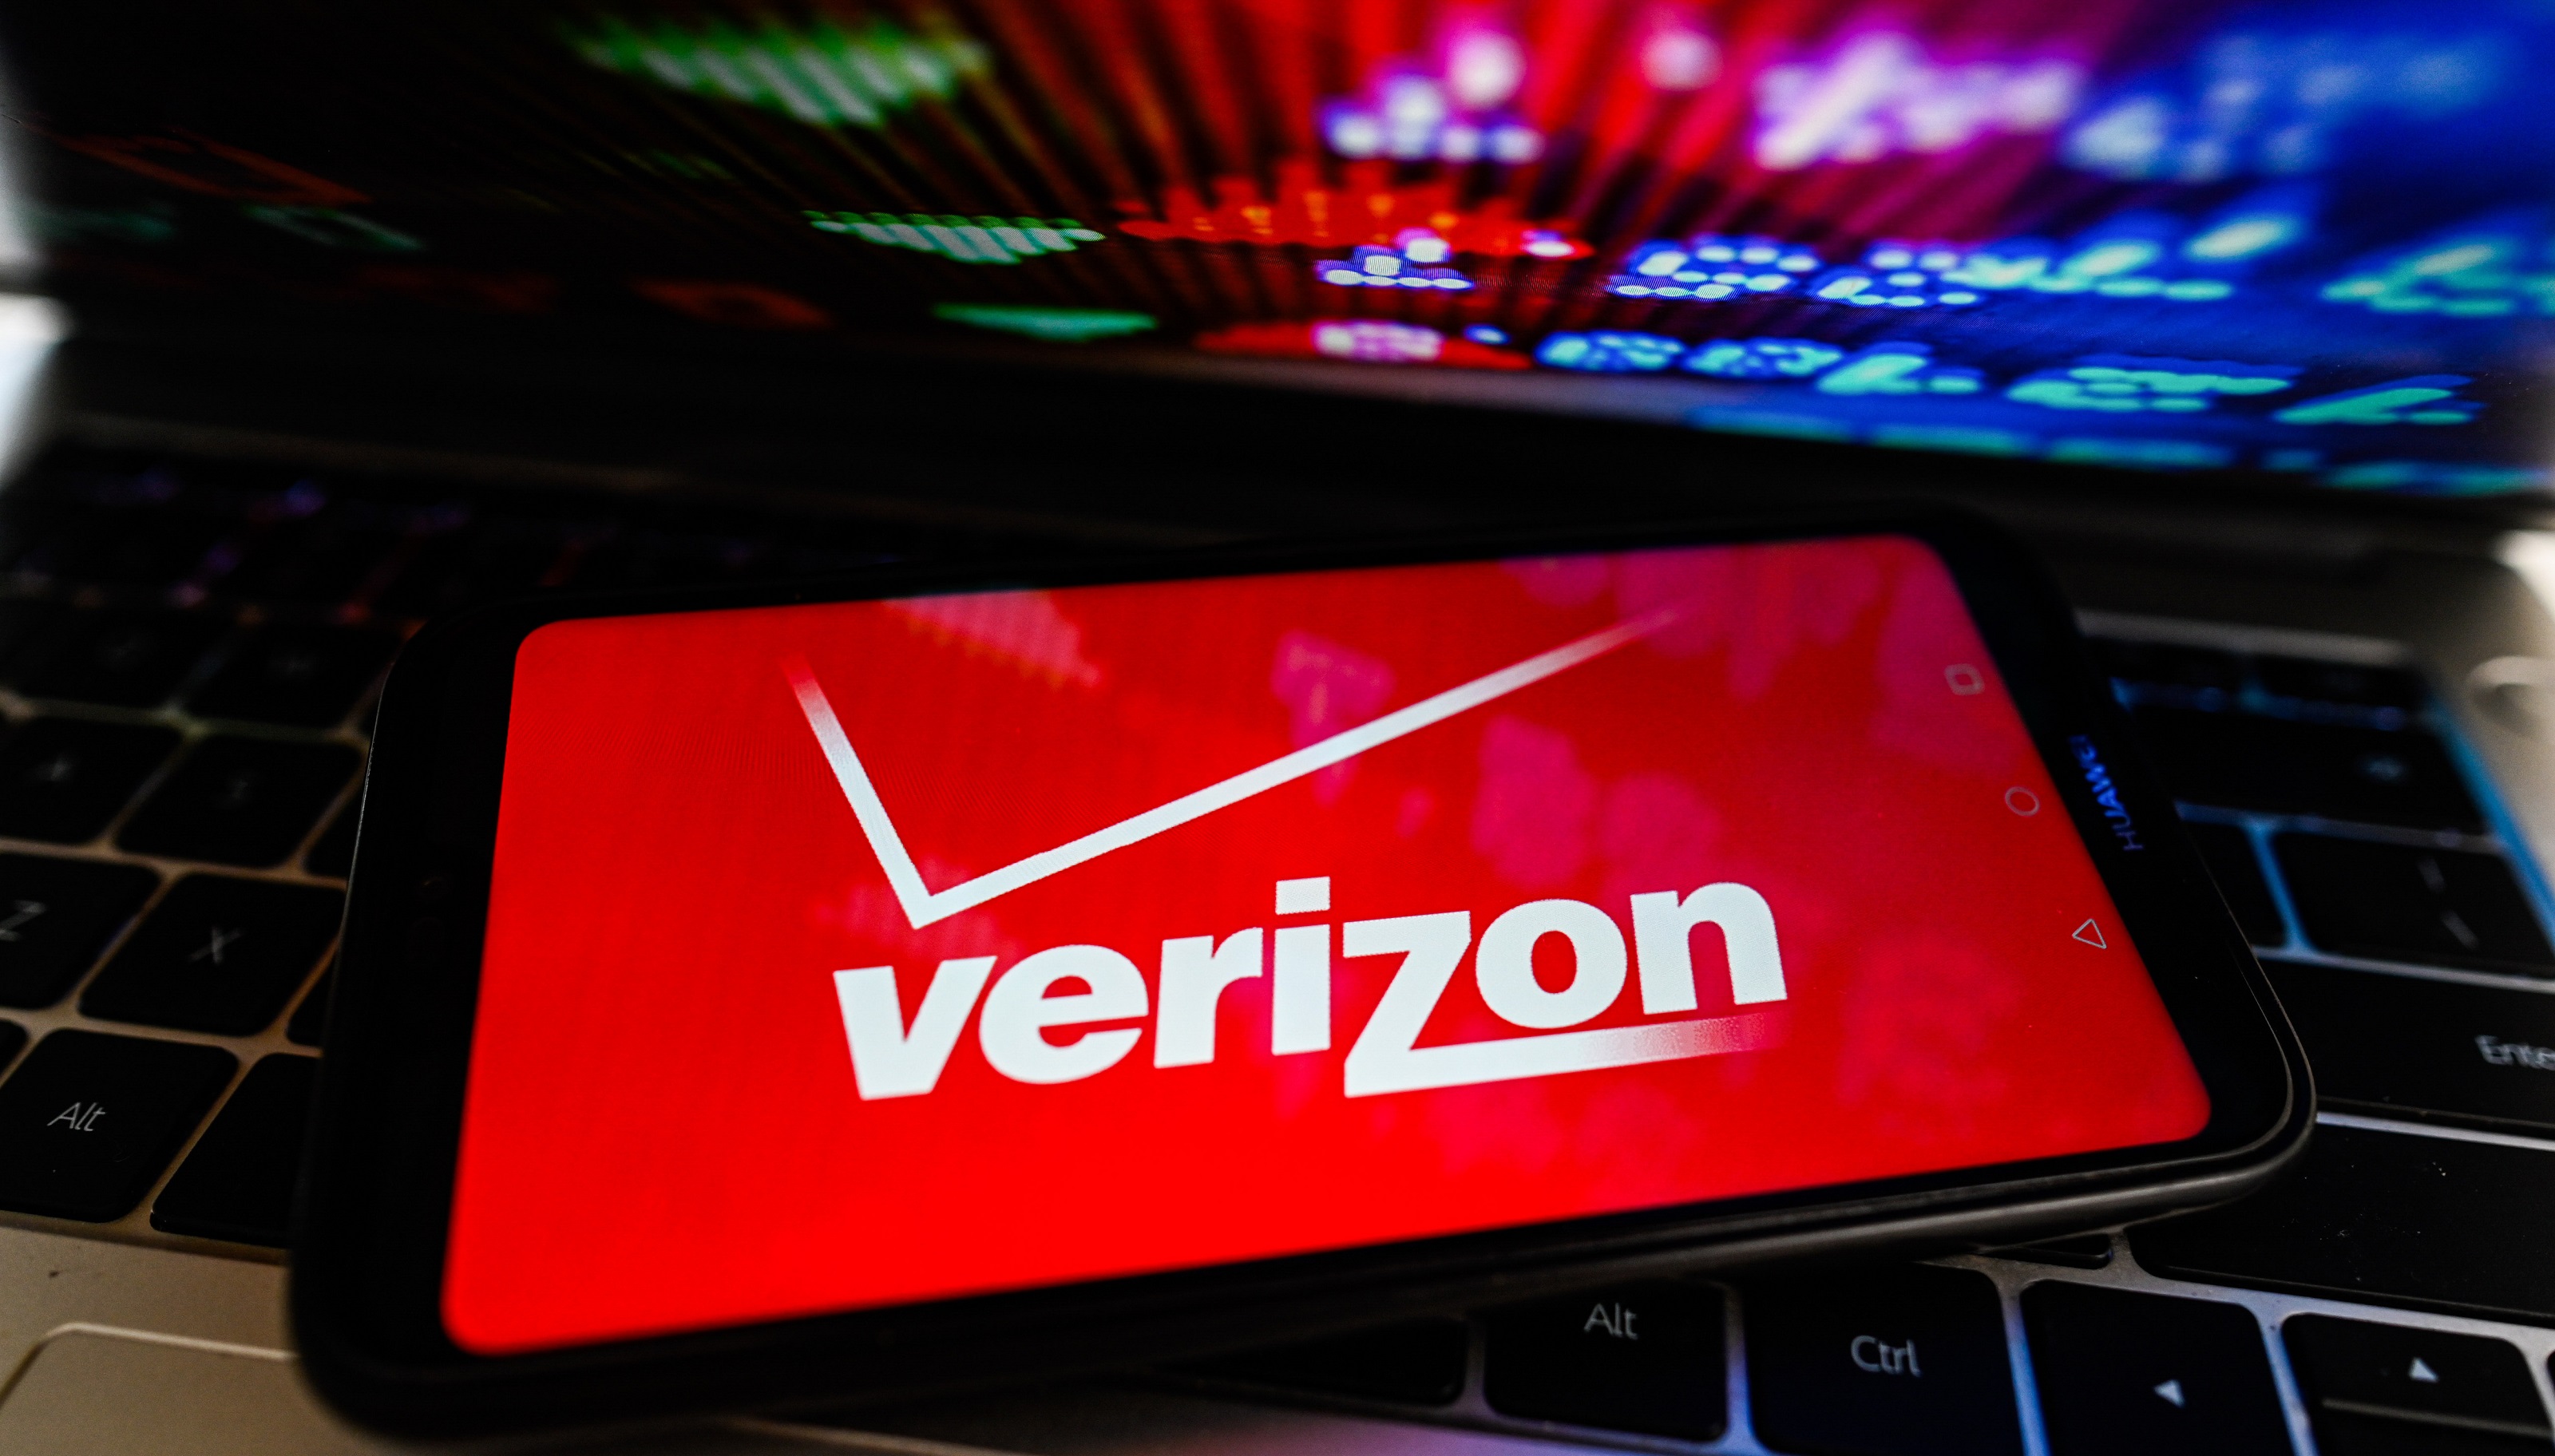 Verizon Offers Netflix, Max Streaming Bundle for $10